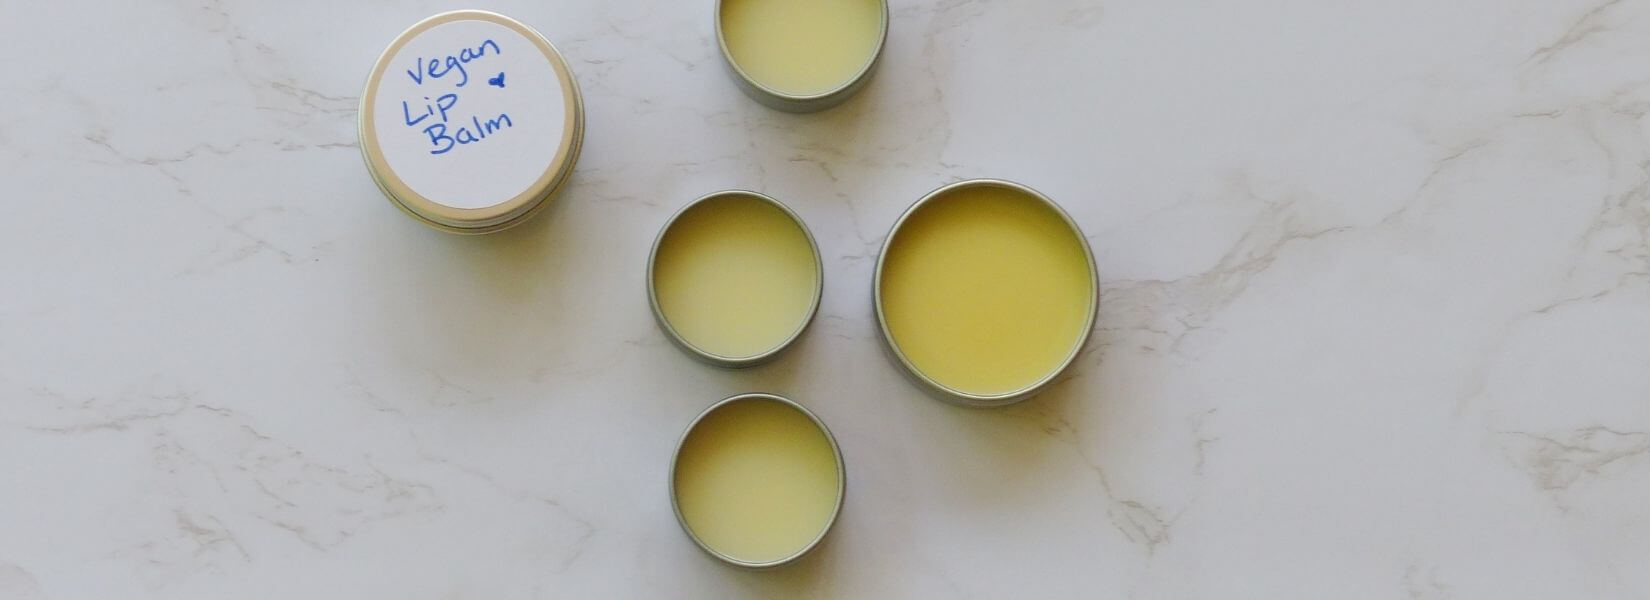 How To Make Lip Balm Without Beeswax